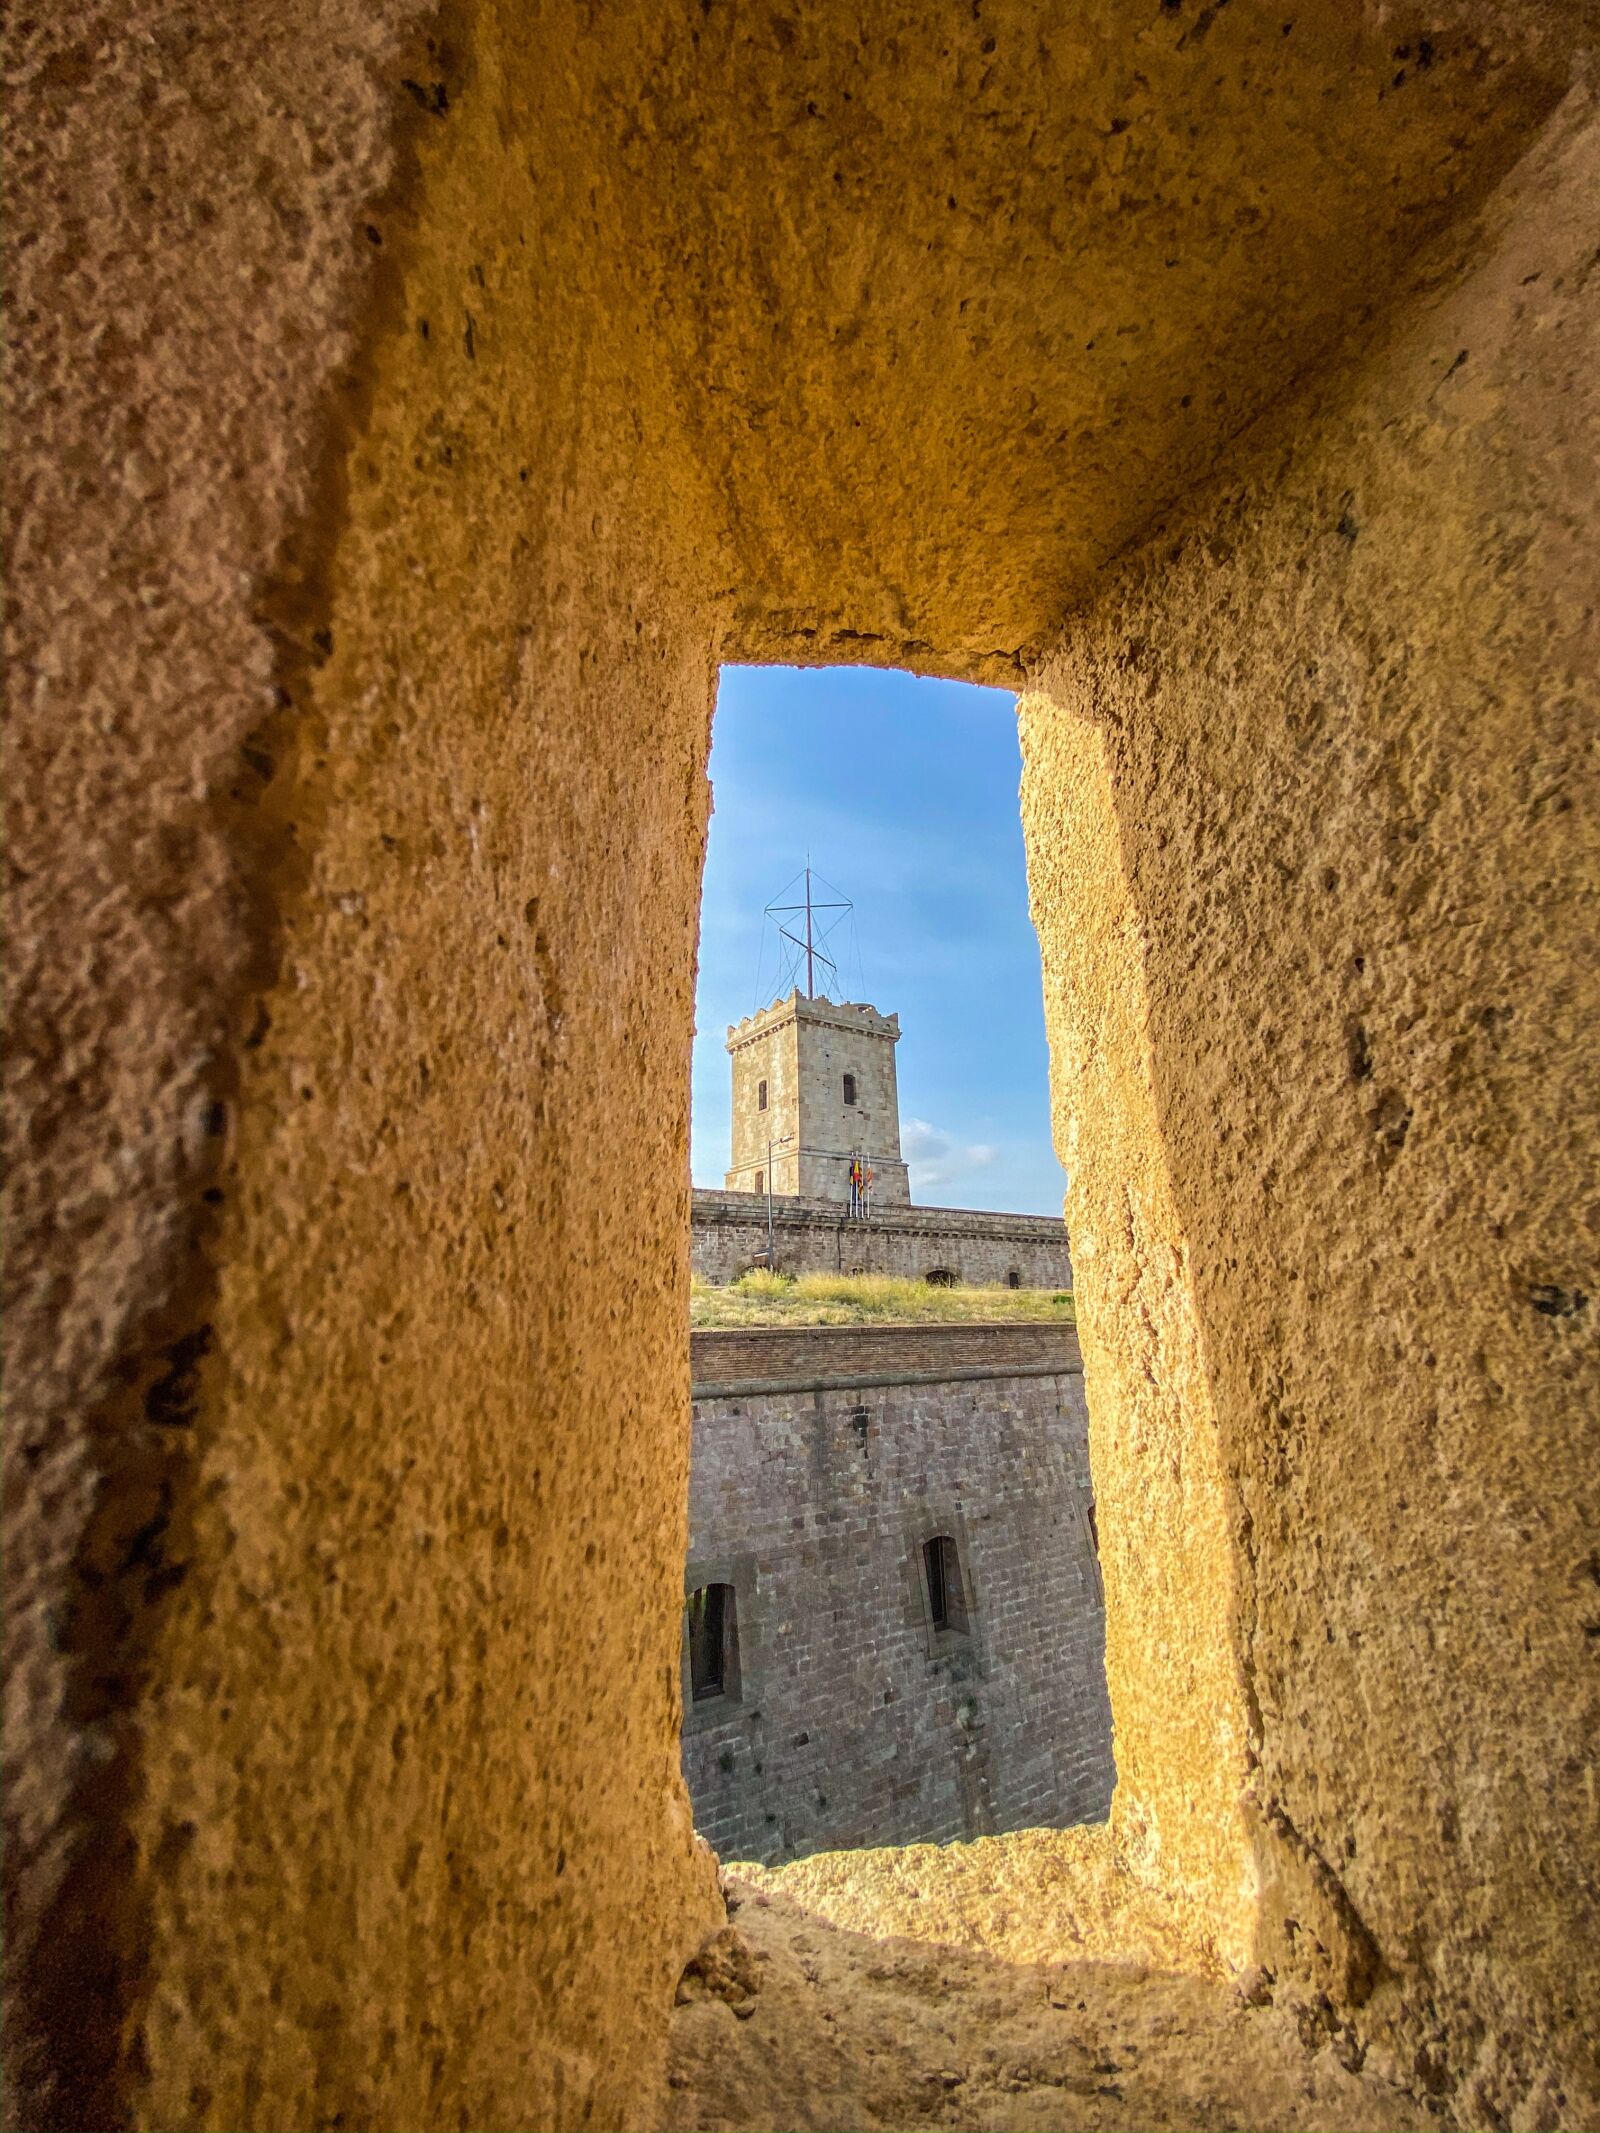 Apple iPhone 11 Pro + iPhone 11 Pro back triple camera 1.54mm f/2.4 sample photo. Barcelona, fortress, spain photography